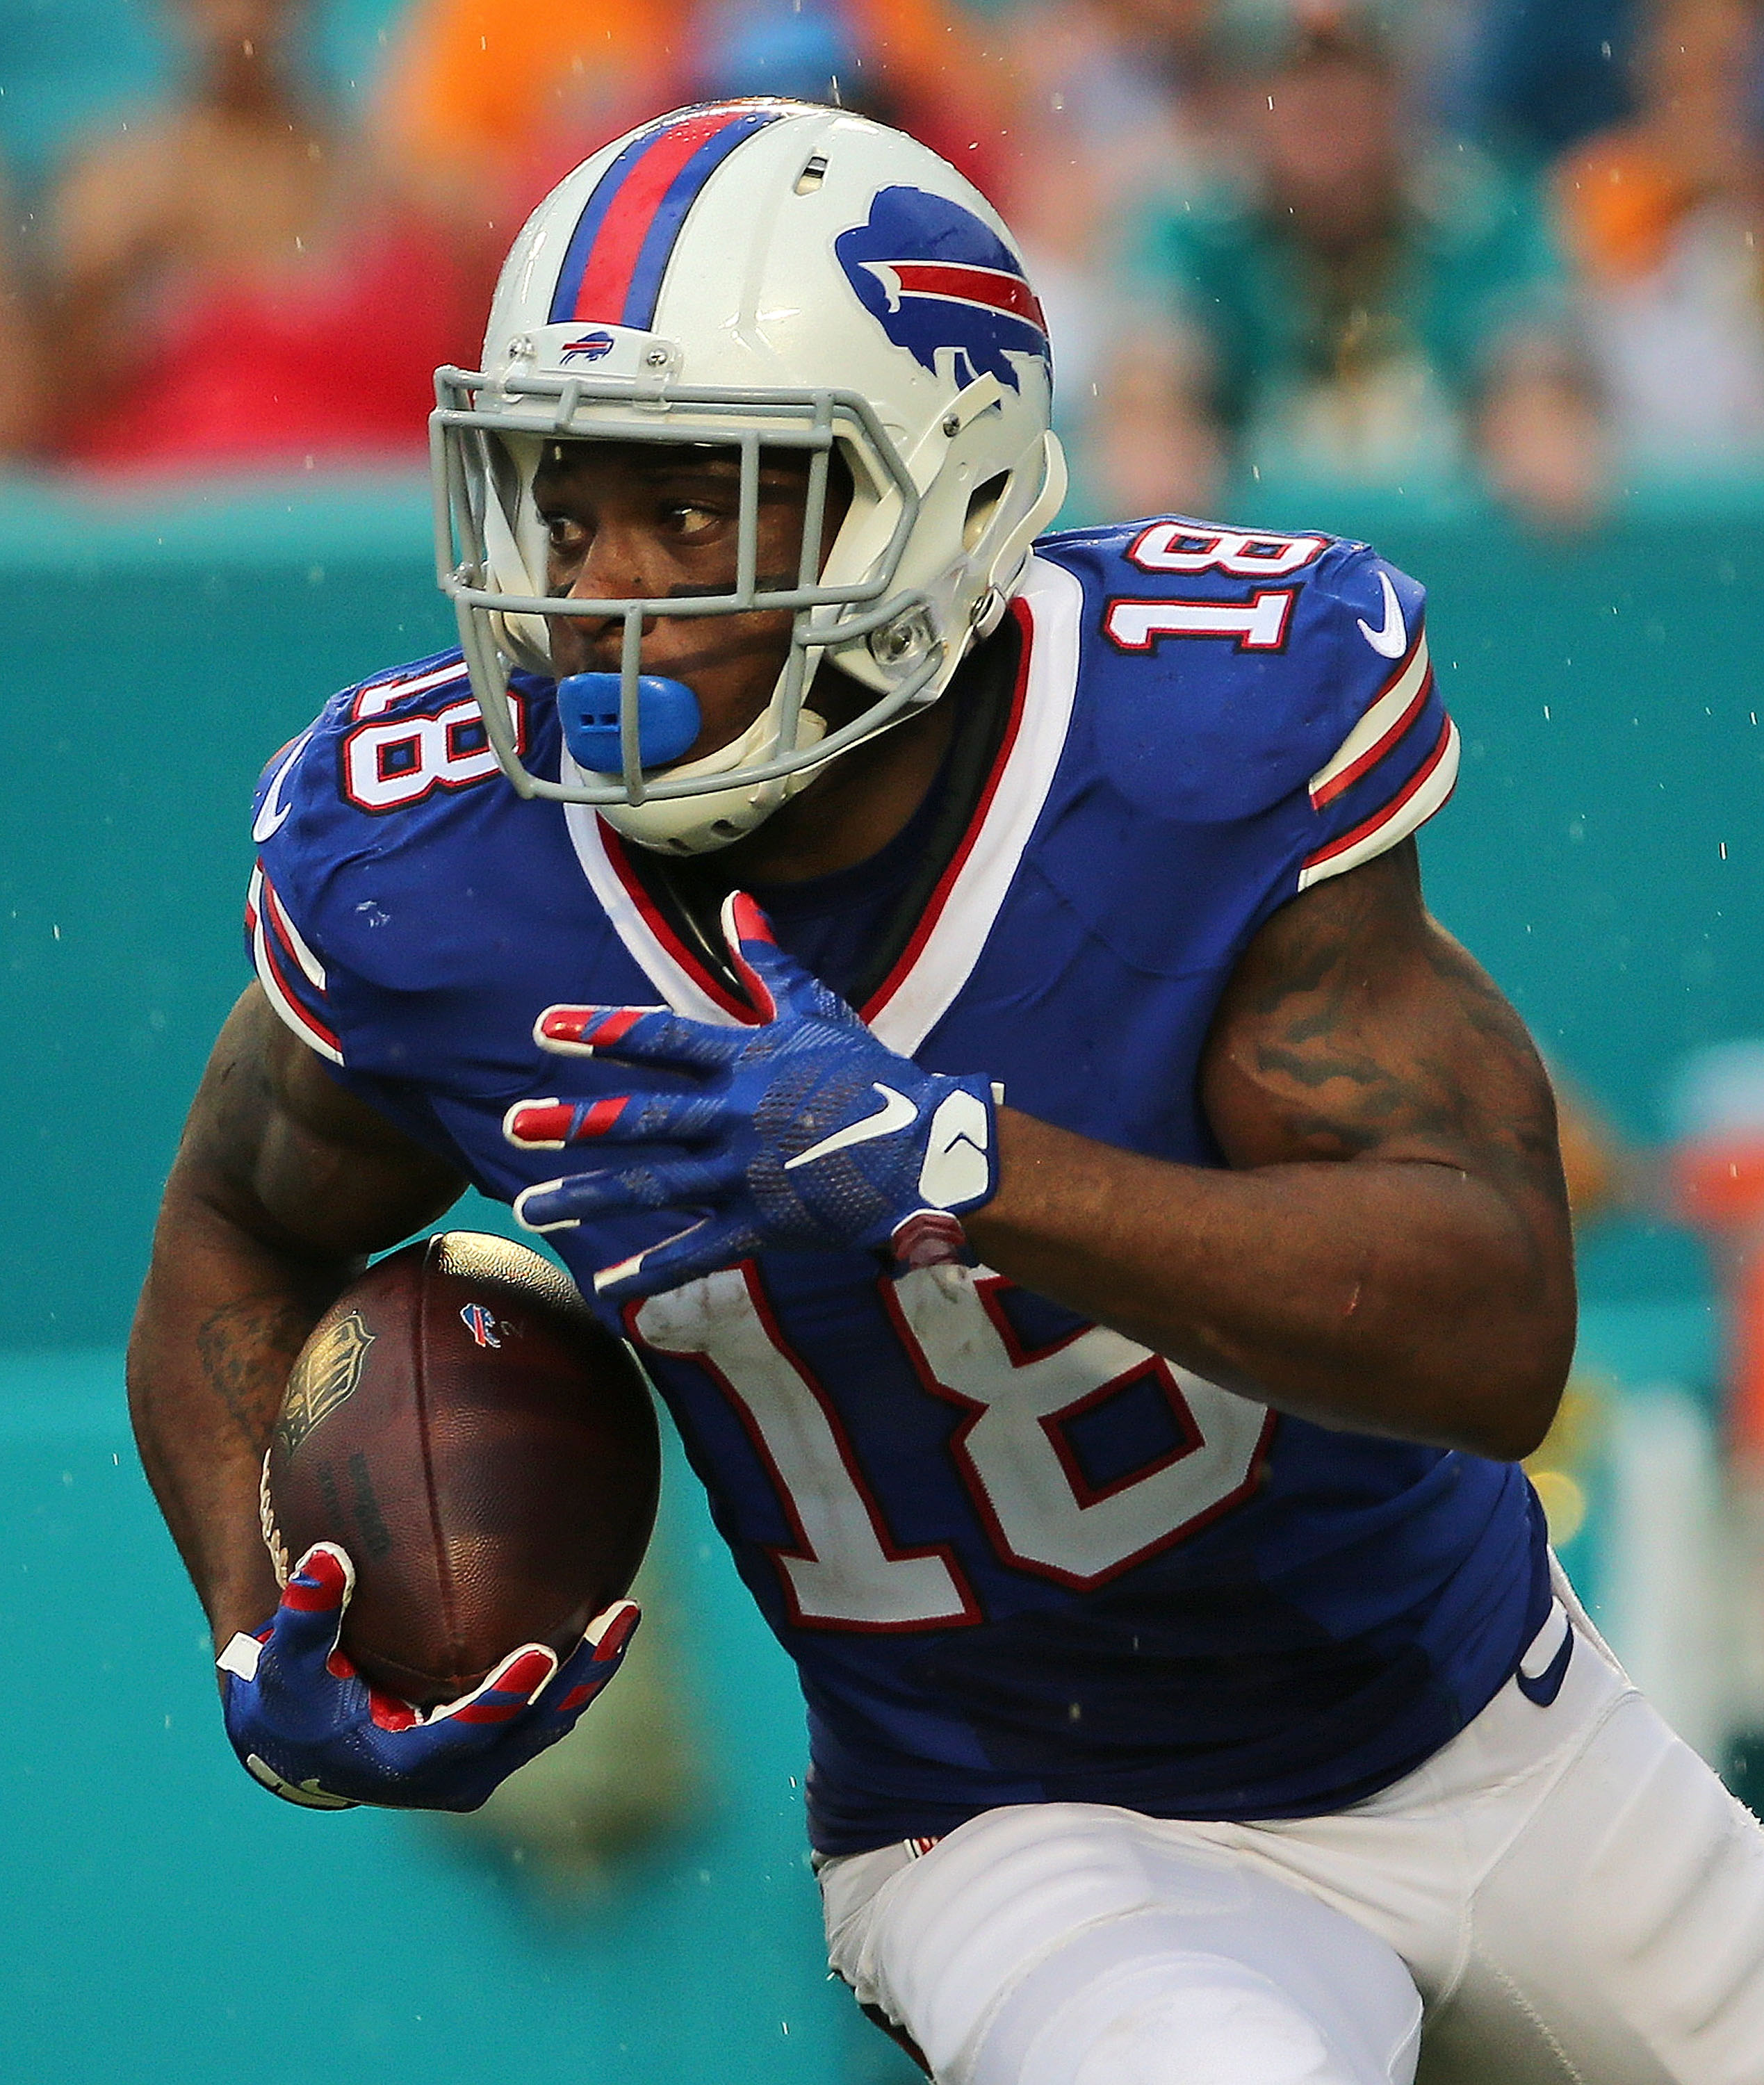 Percy Harvin has provided a spark o the outside for Buffalo. (Getty)